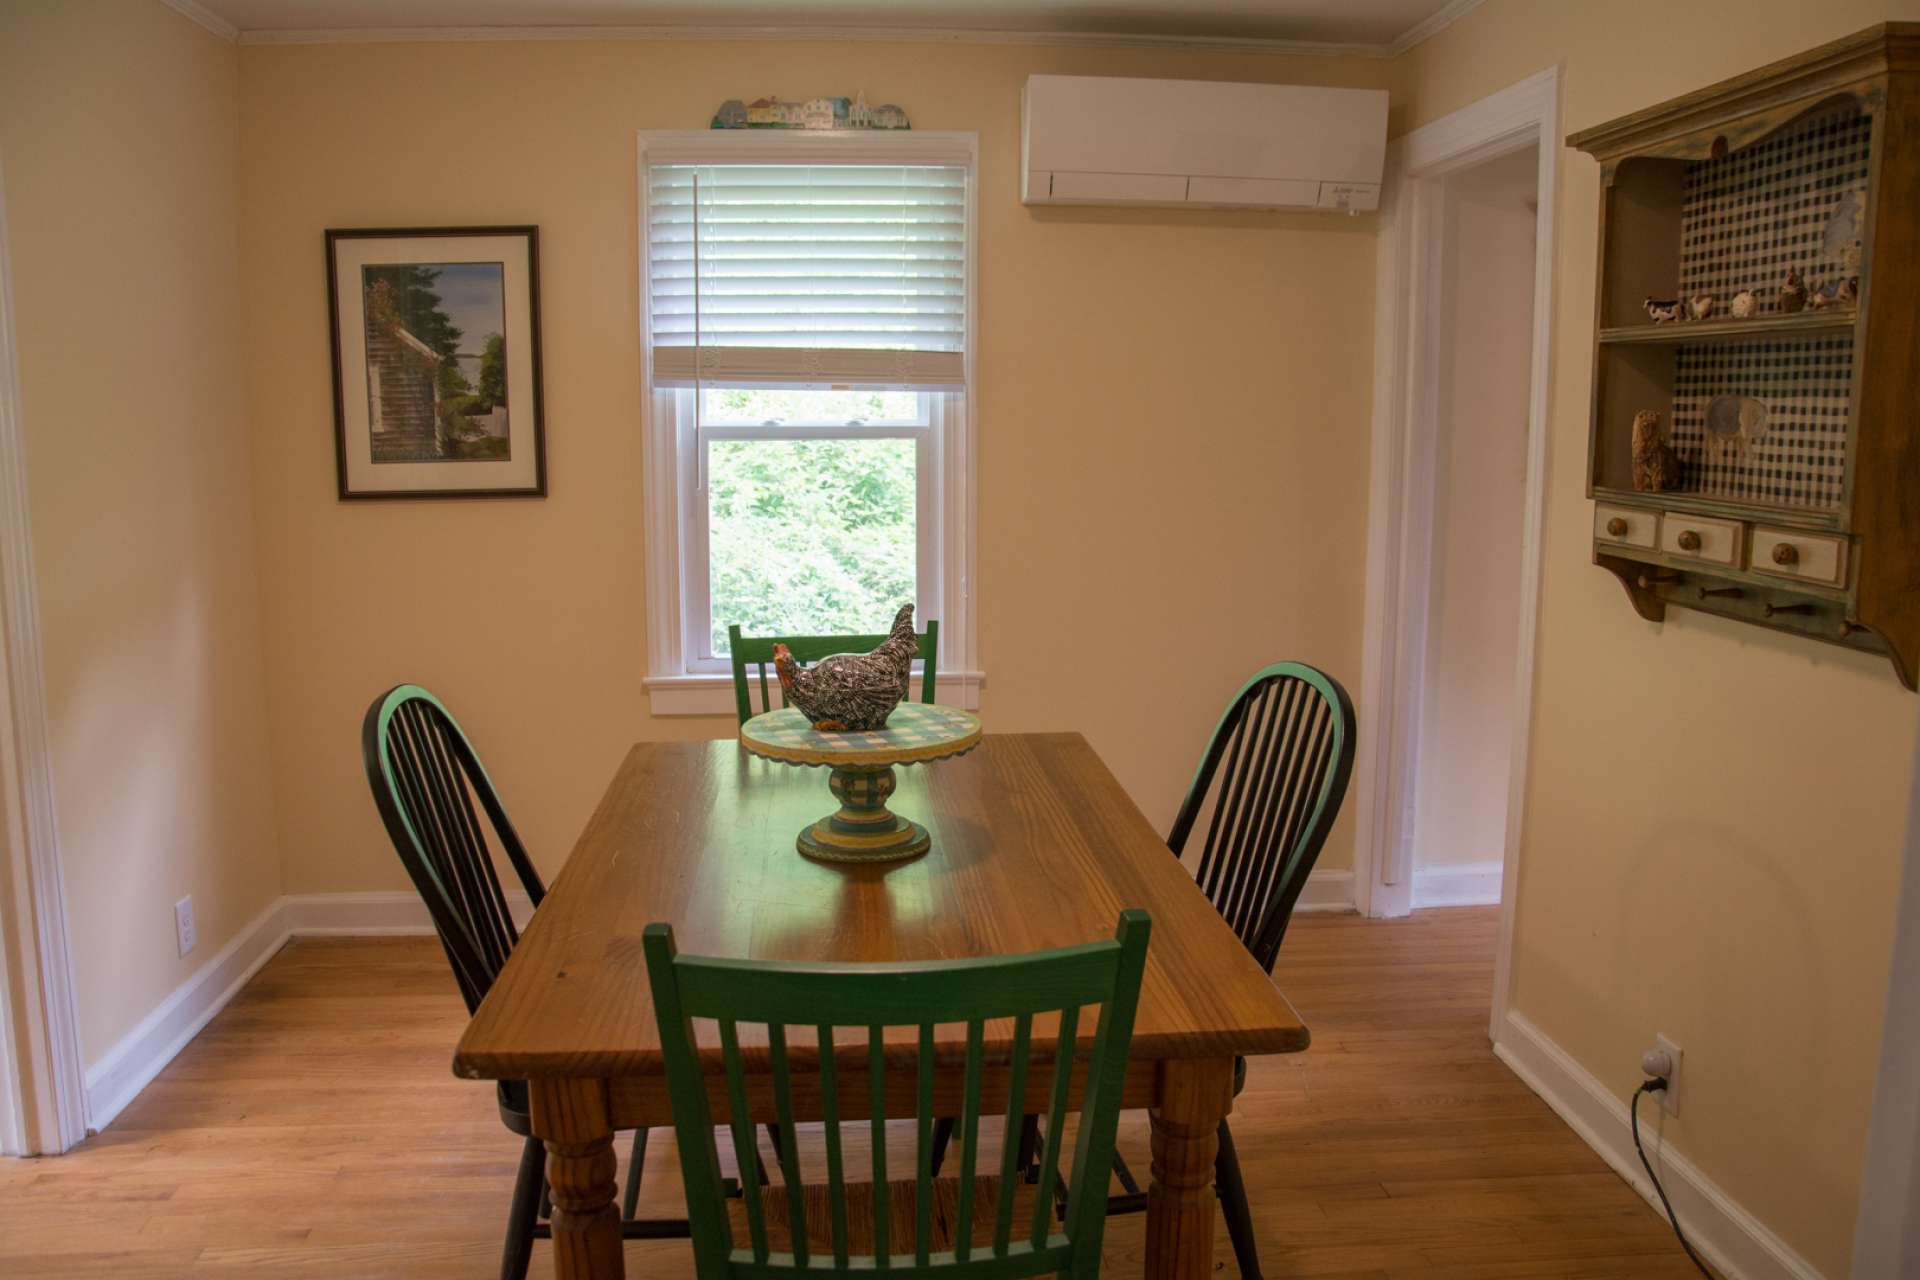 A separate dining area for the family meals.